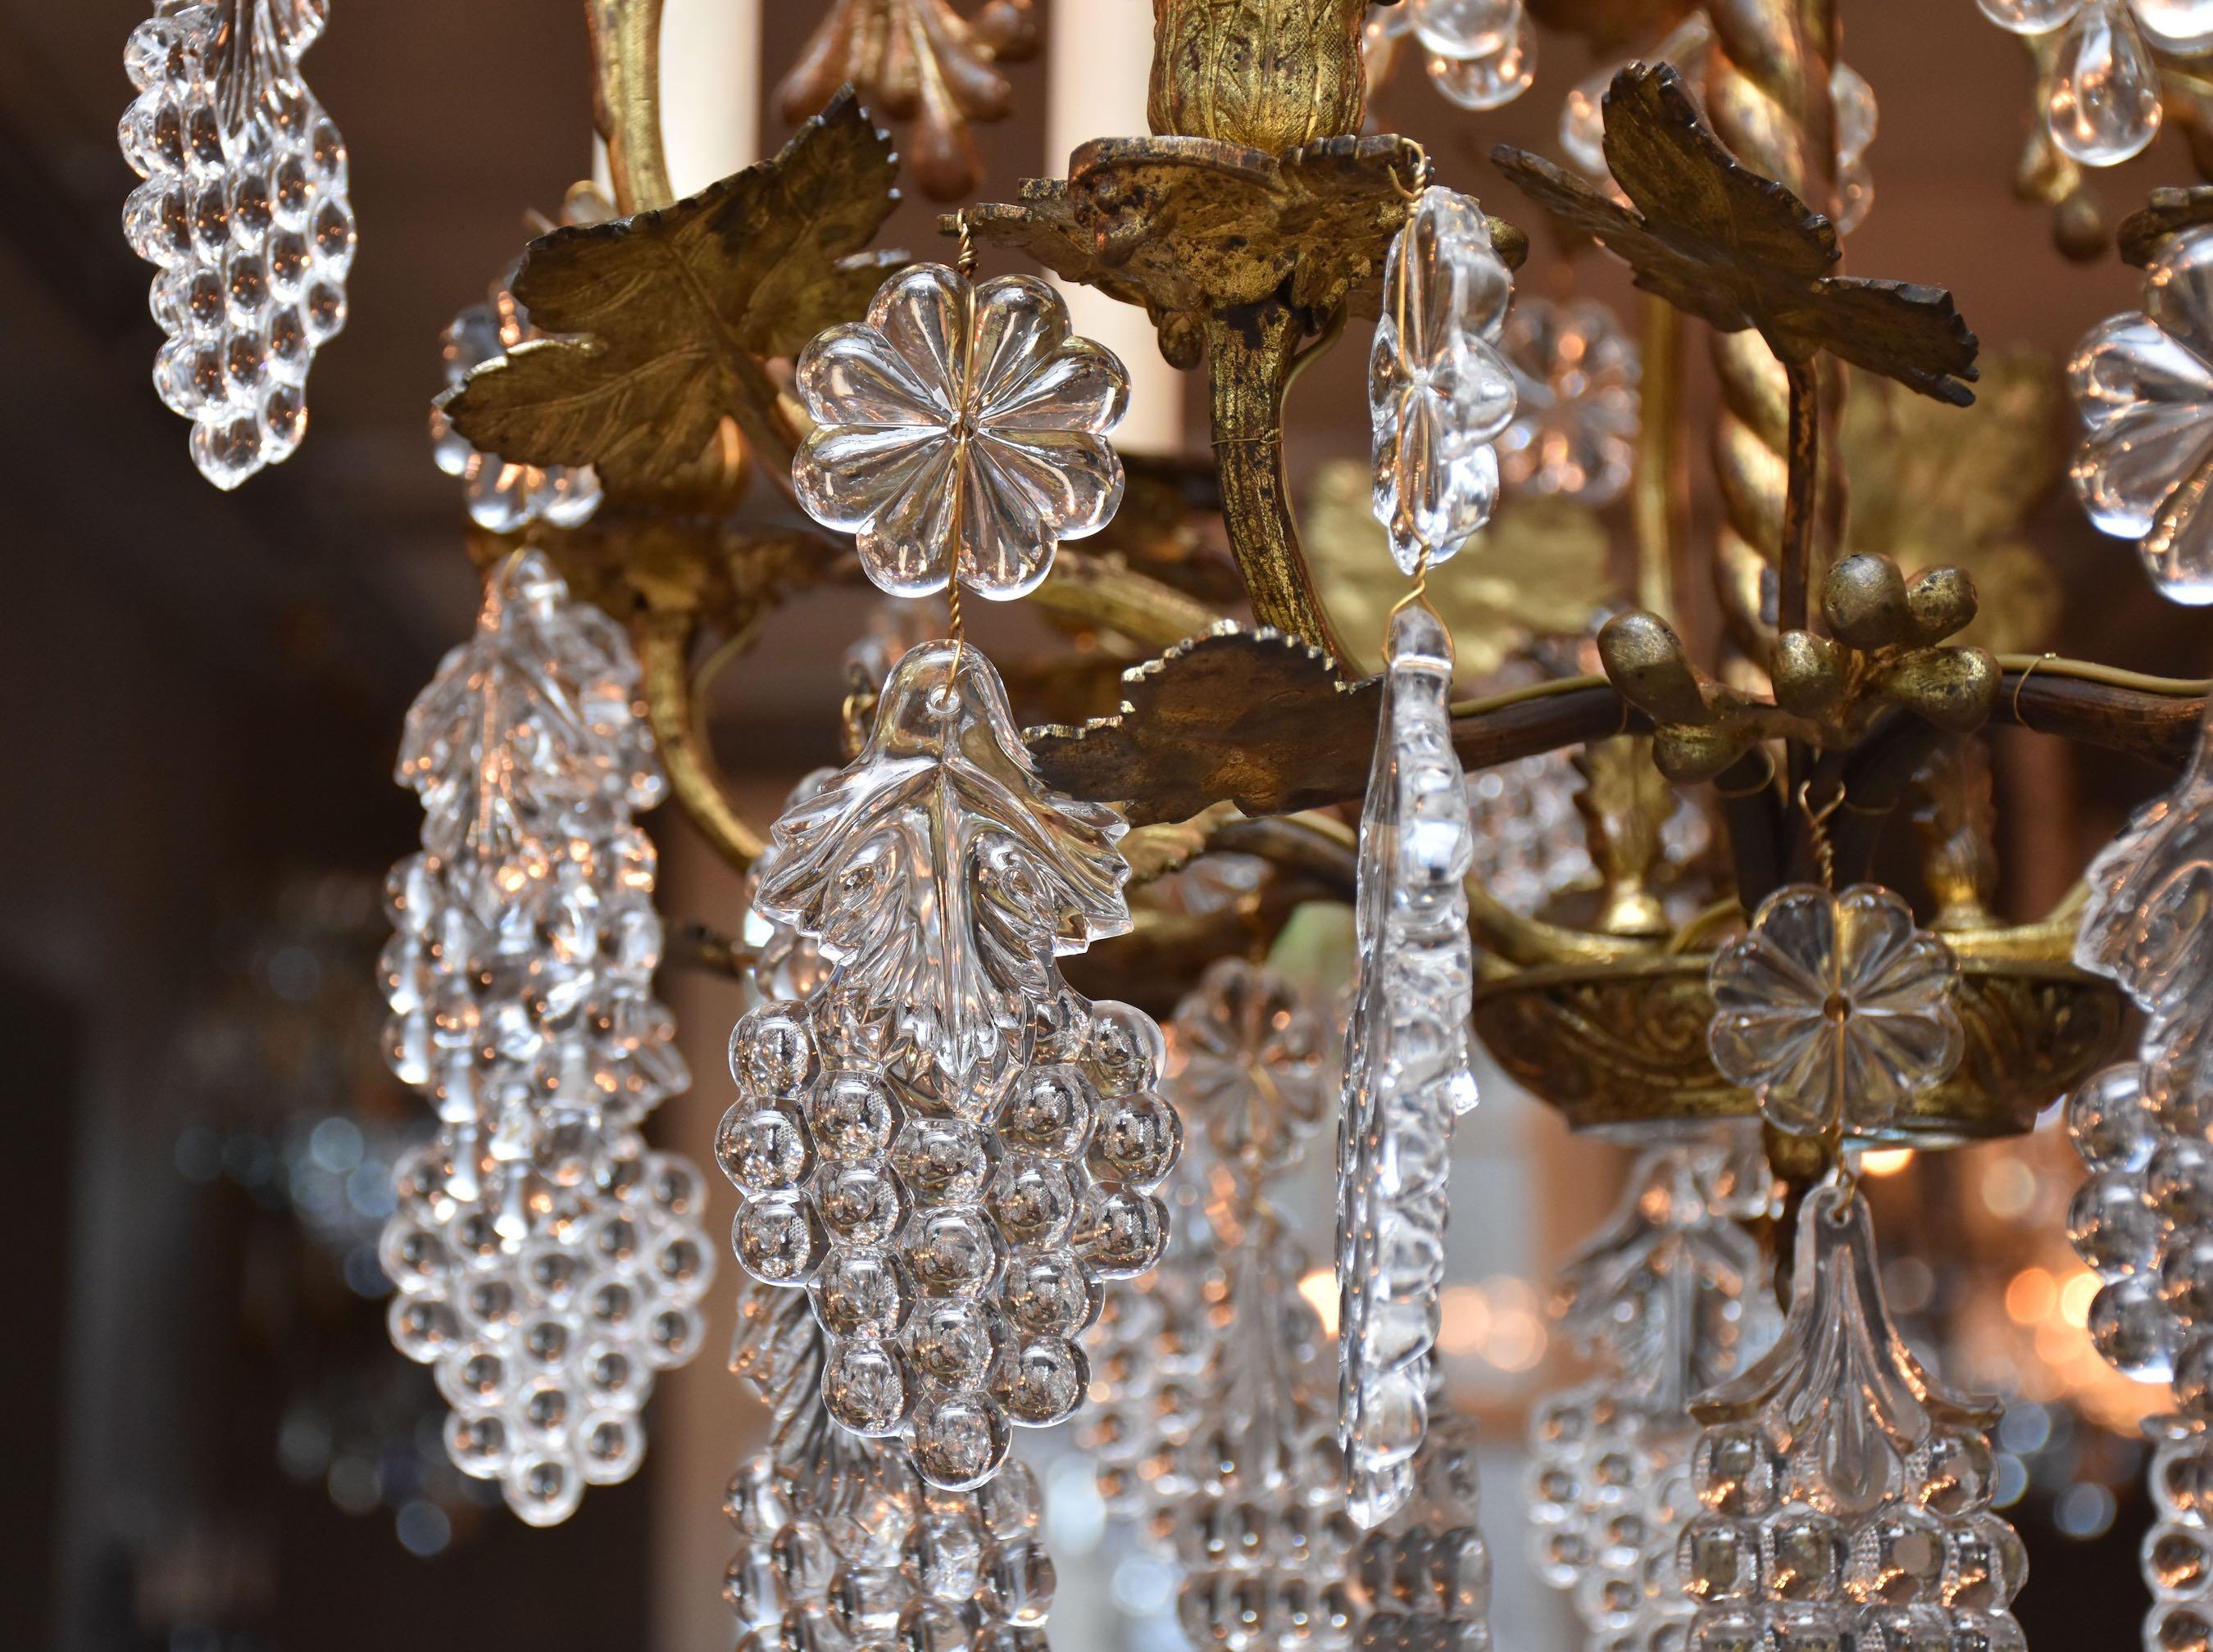 A wonderful 6 light gilt bronze French chandelier.
Decorated with vine leaves, vines, crystal grapes and large flower rosettes.
Below the chandelier is a cut crystal bol.
Place of origin- France, Loire Vallei
Period- late 19th/ early 20th